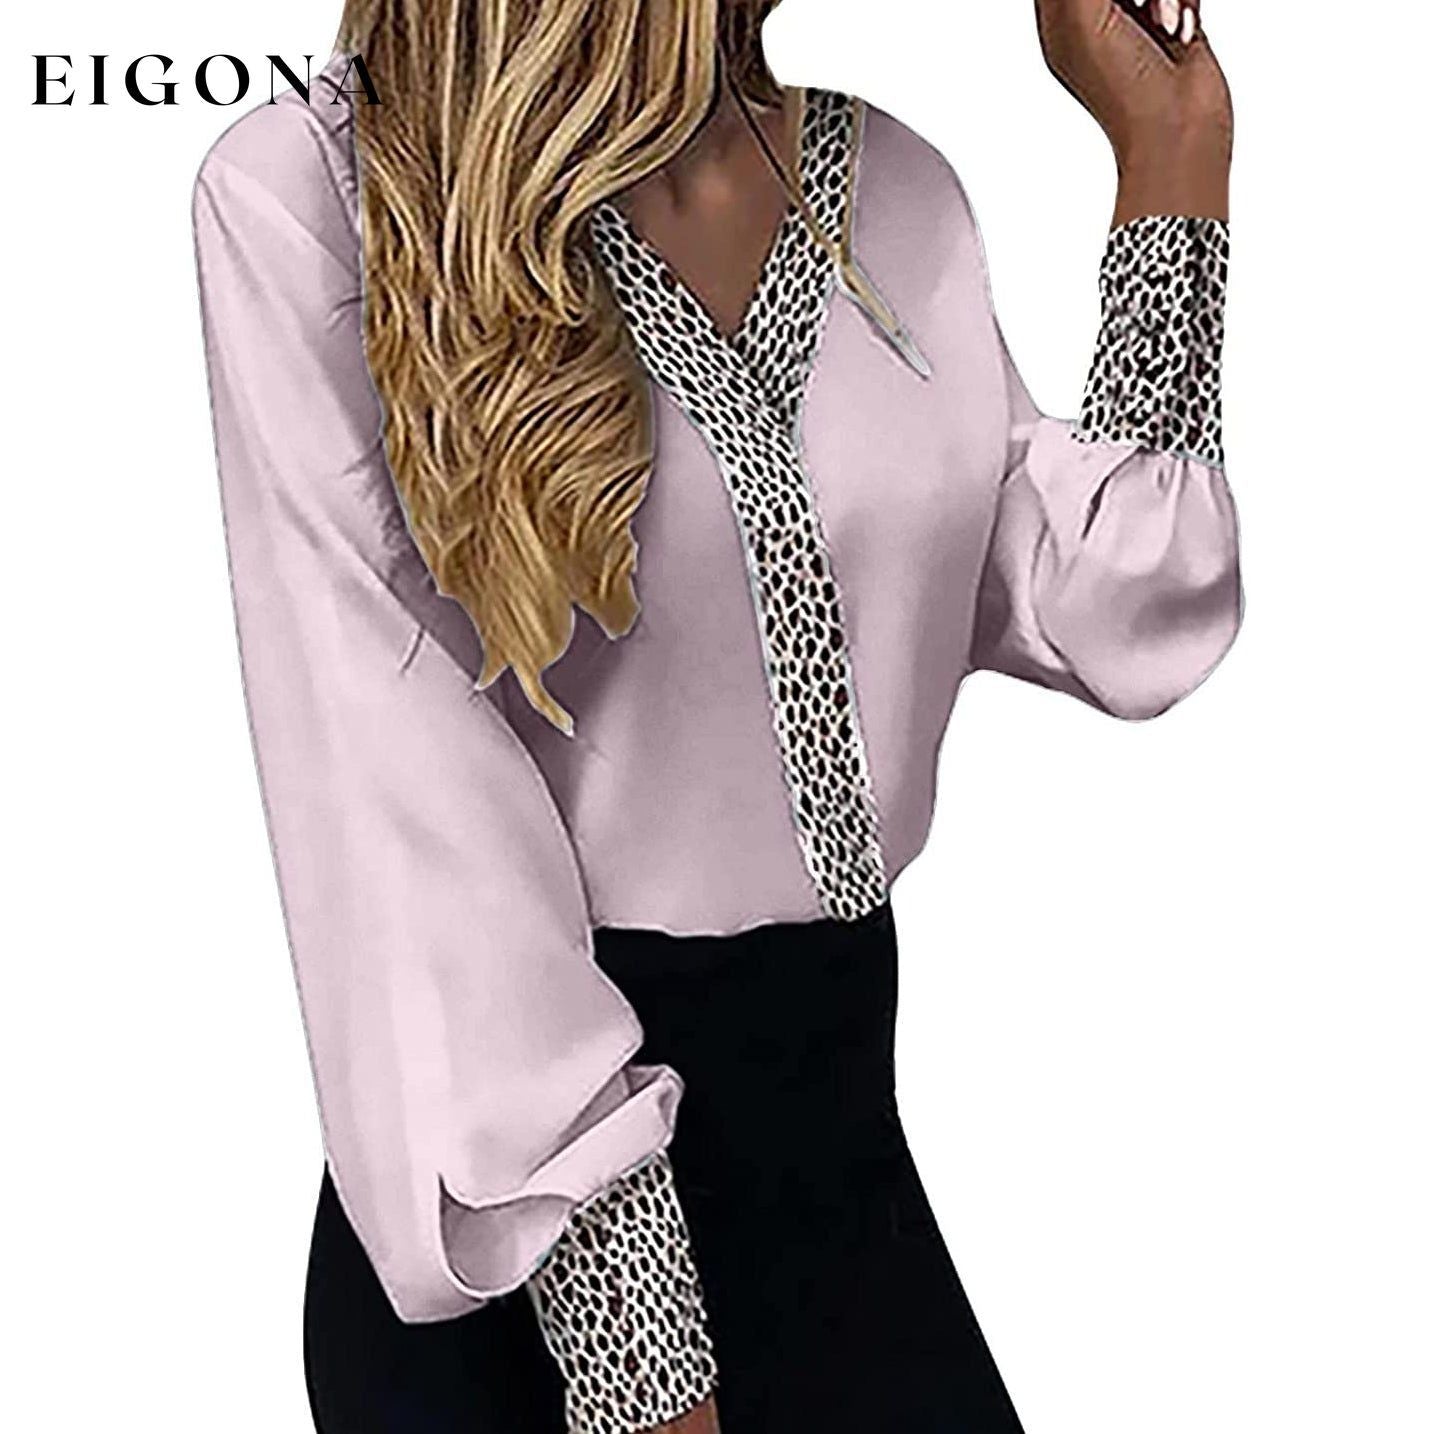 Women's Sexy Leopard Print Shirt __stock:200 clothes refund_fee:800 tops